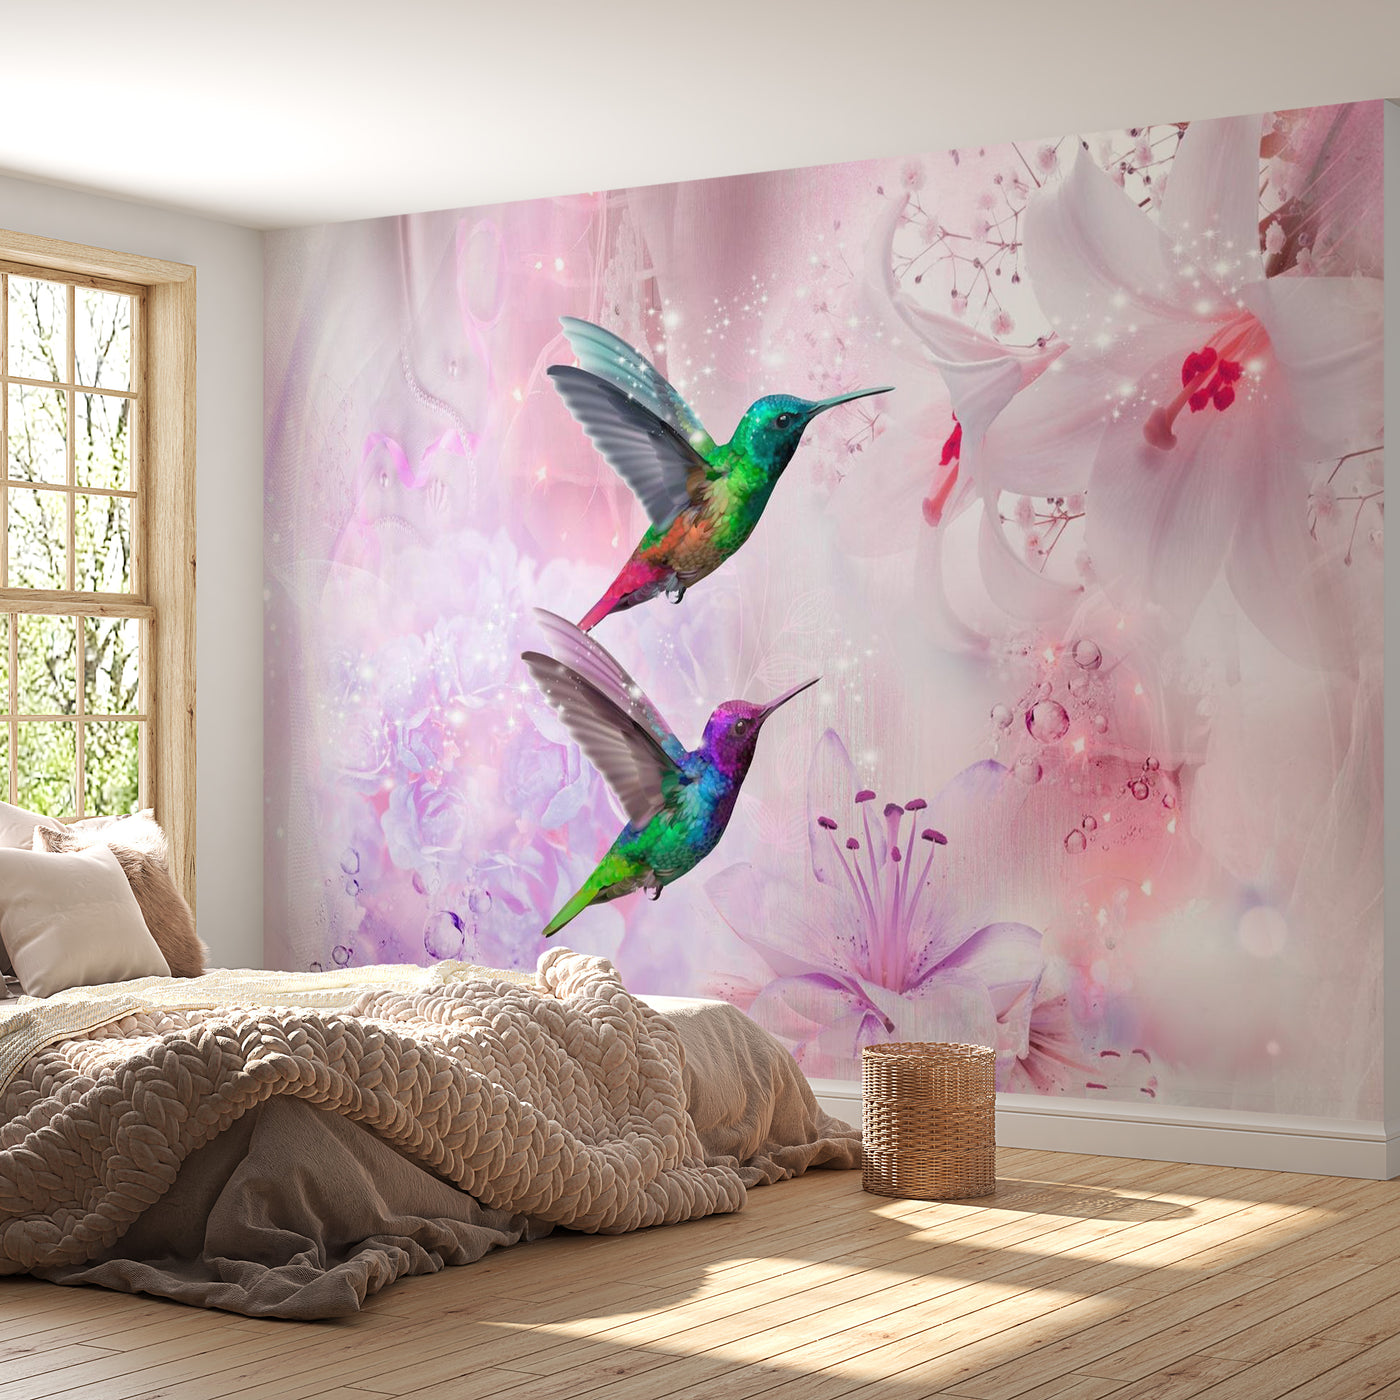 Peel & Stick Animal Wall Mural - Colourful Hummingbirds Purple - Removable Wall Decals